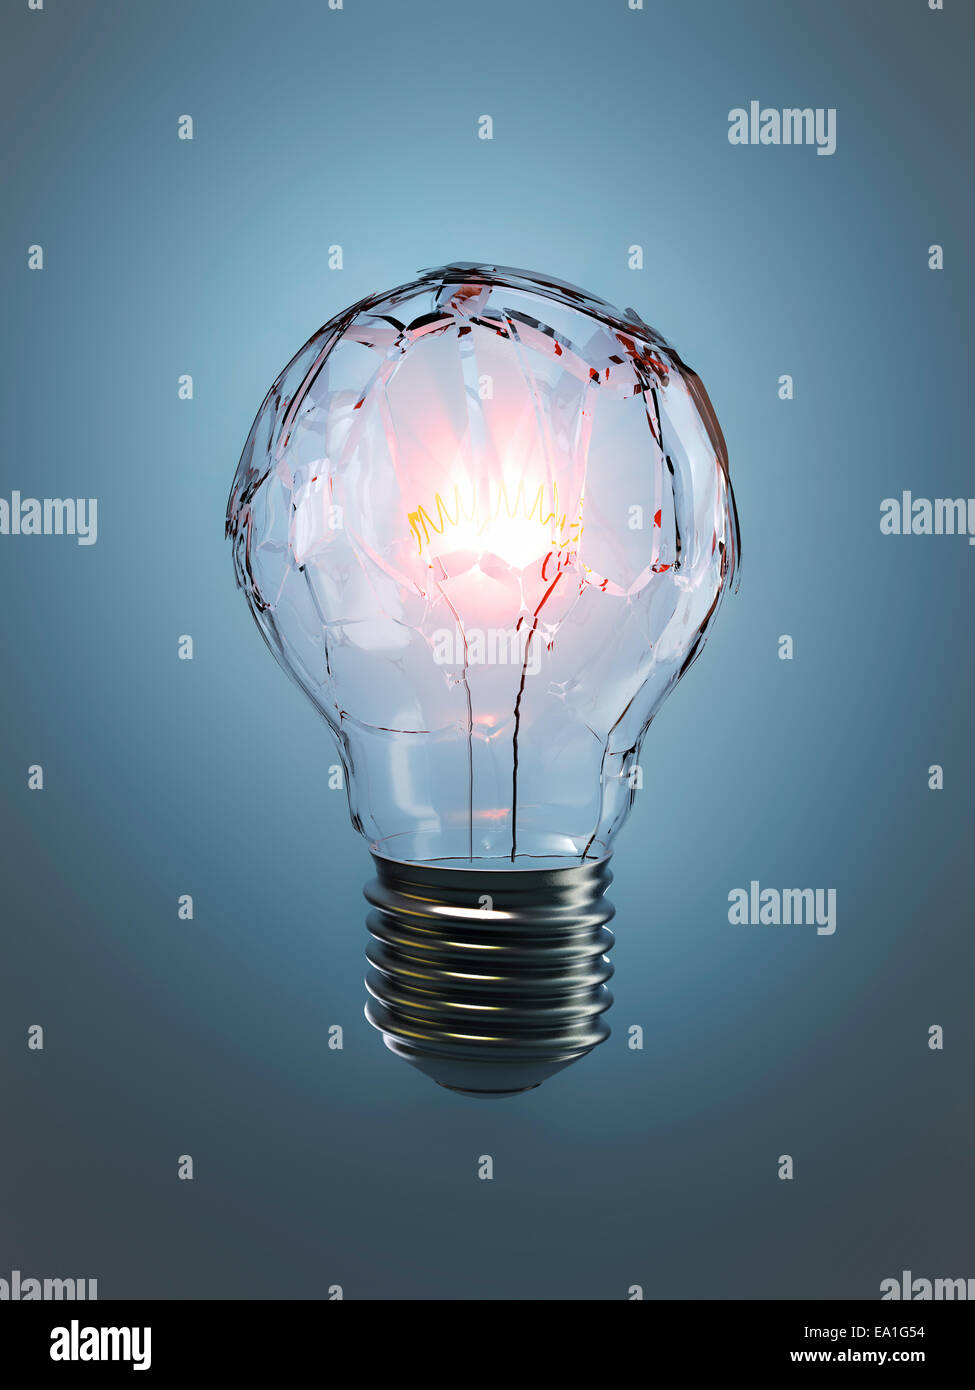 A shattered light bulb what is illuminated  and on household lighting Stock Photo